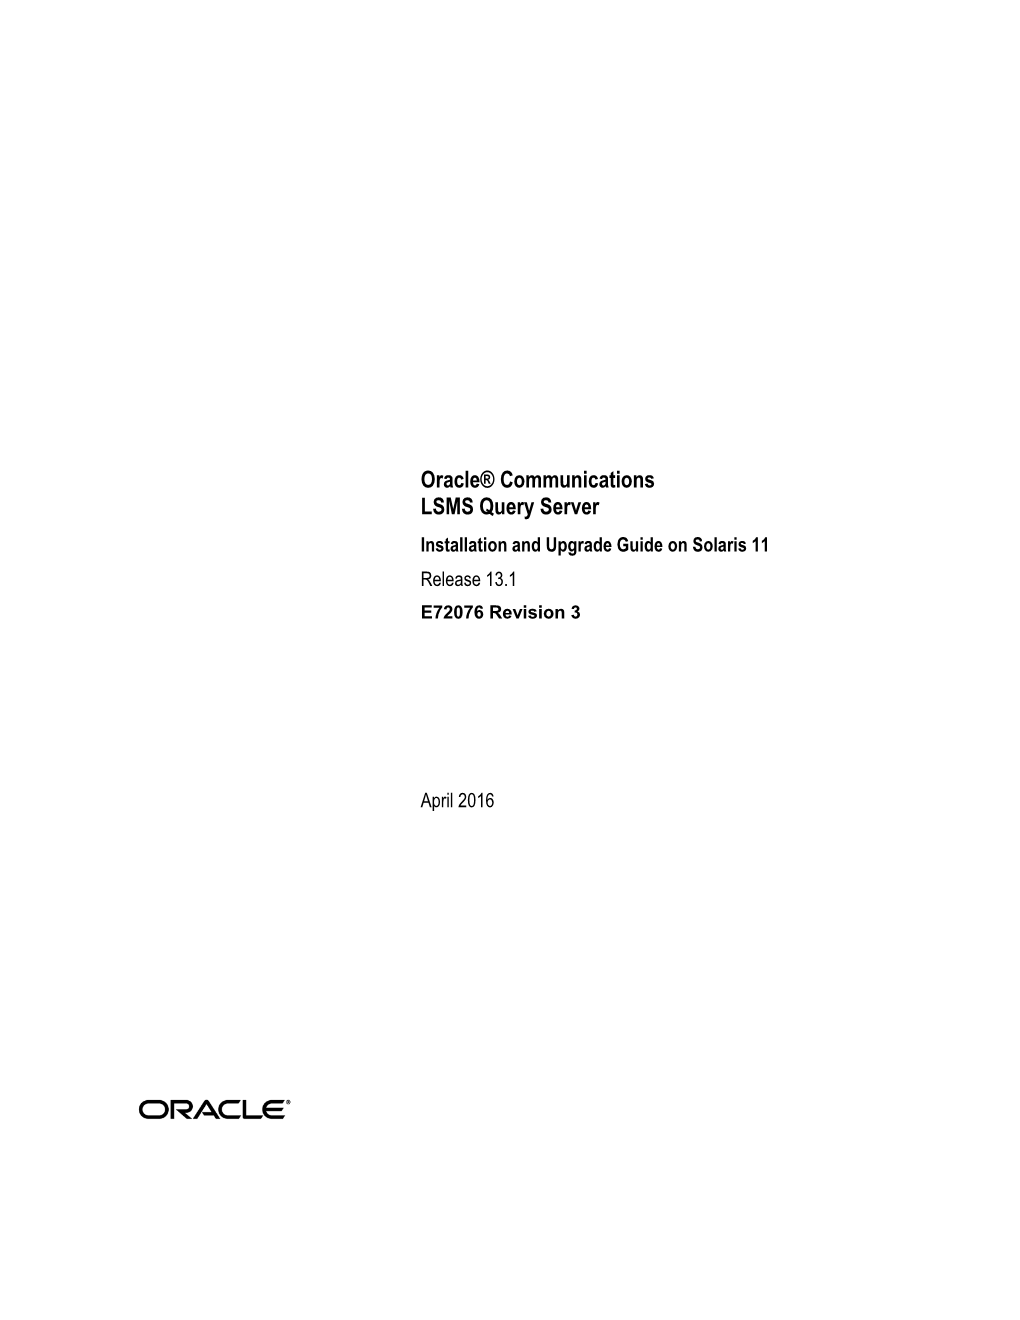 Oracle® Communications LSMS Query Server Installation and Upgrade Guide on Solaris 11 Release 13.1 E72076 Revision 3